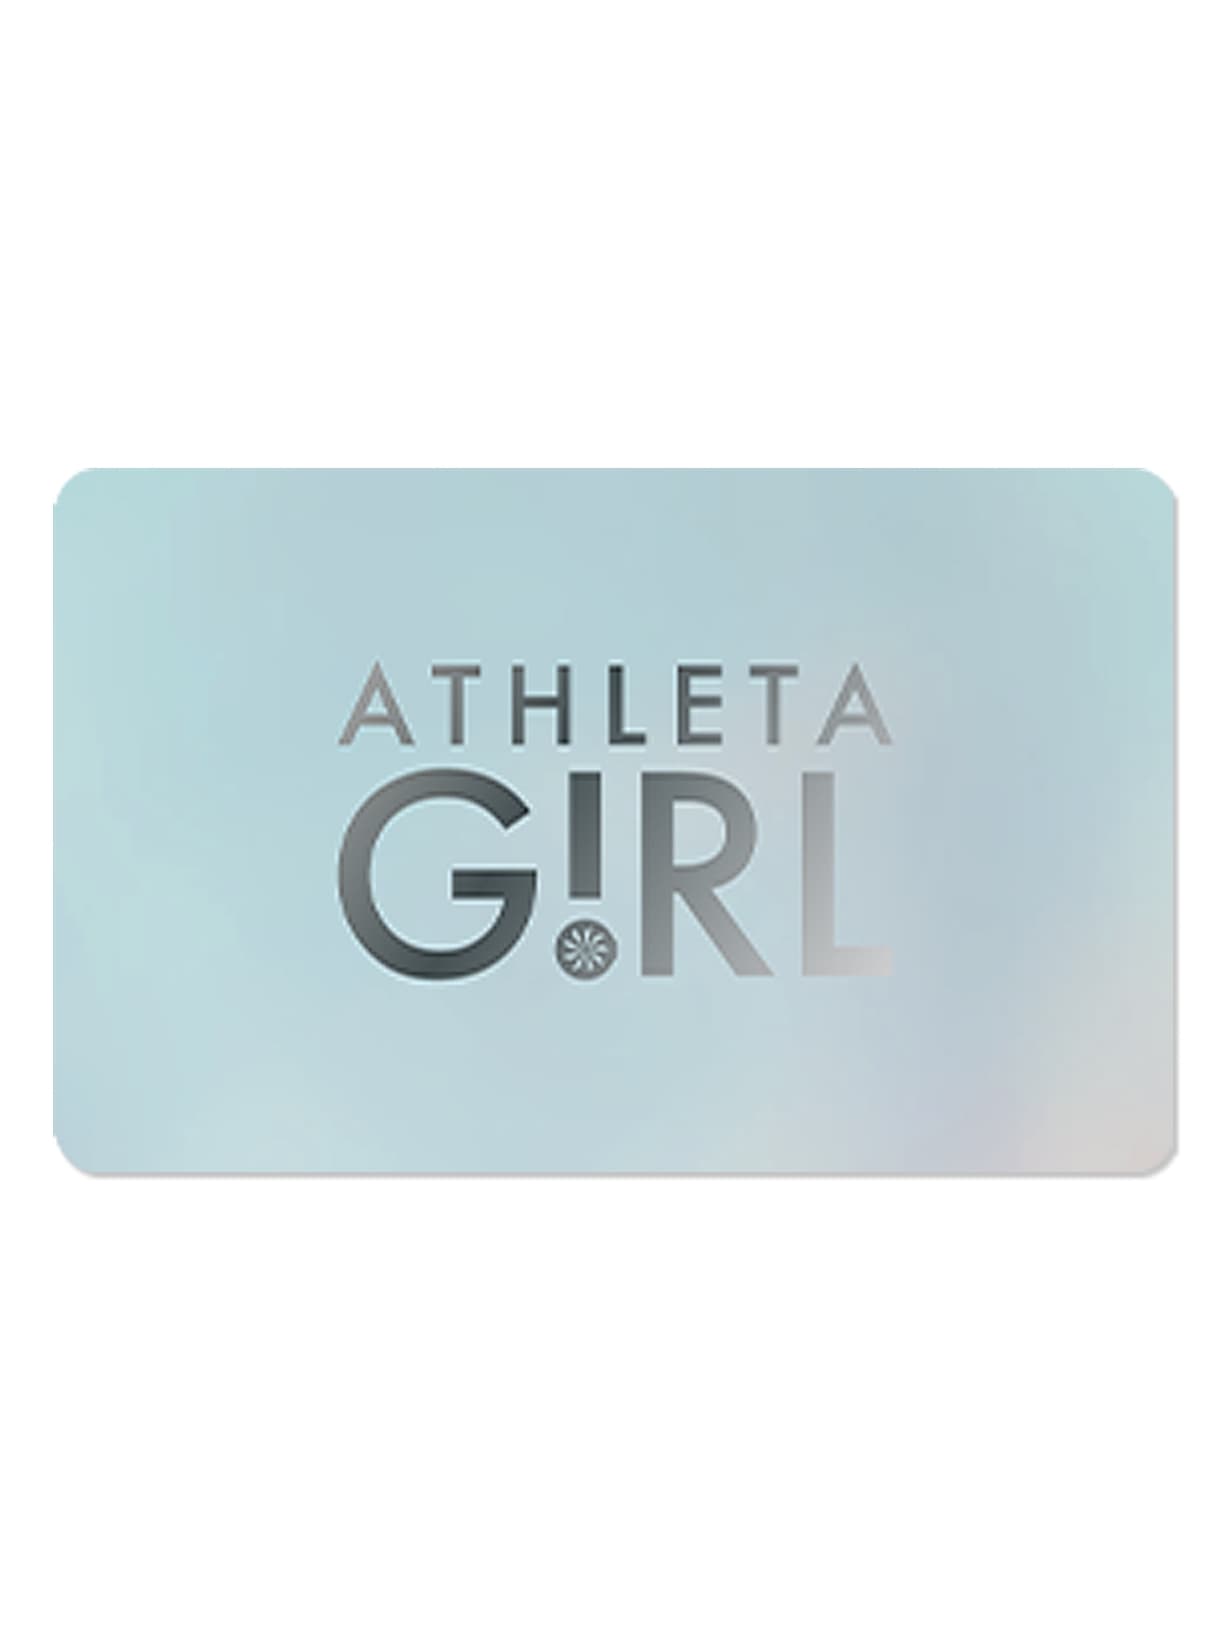 athletica gift card